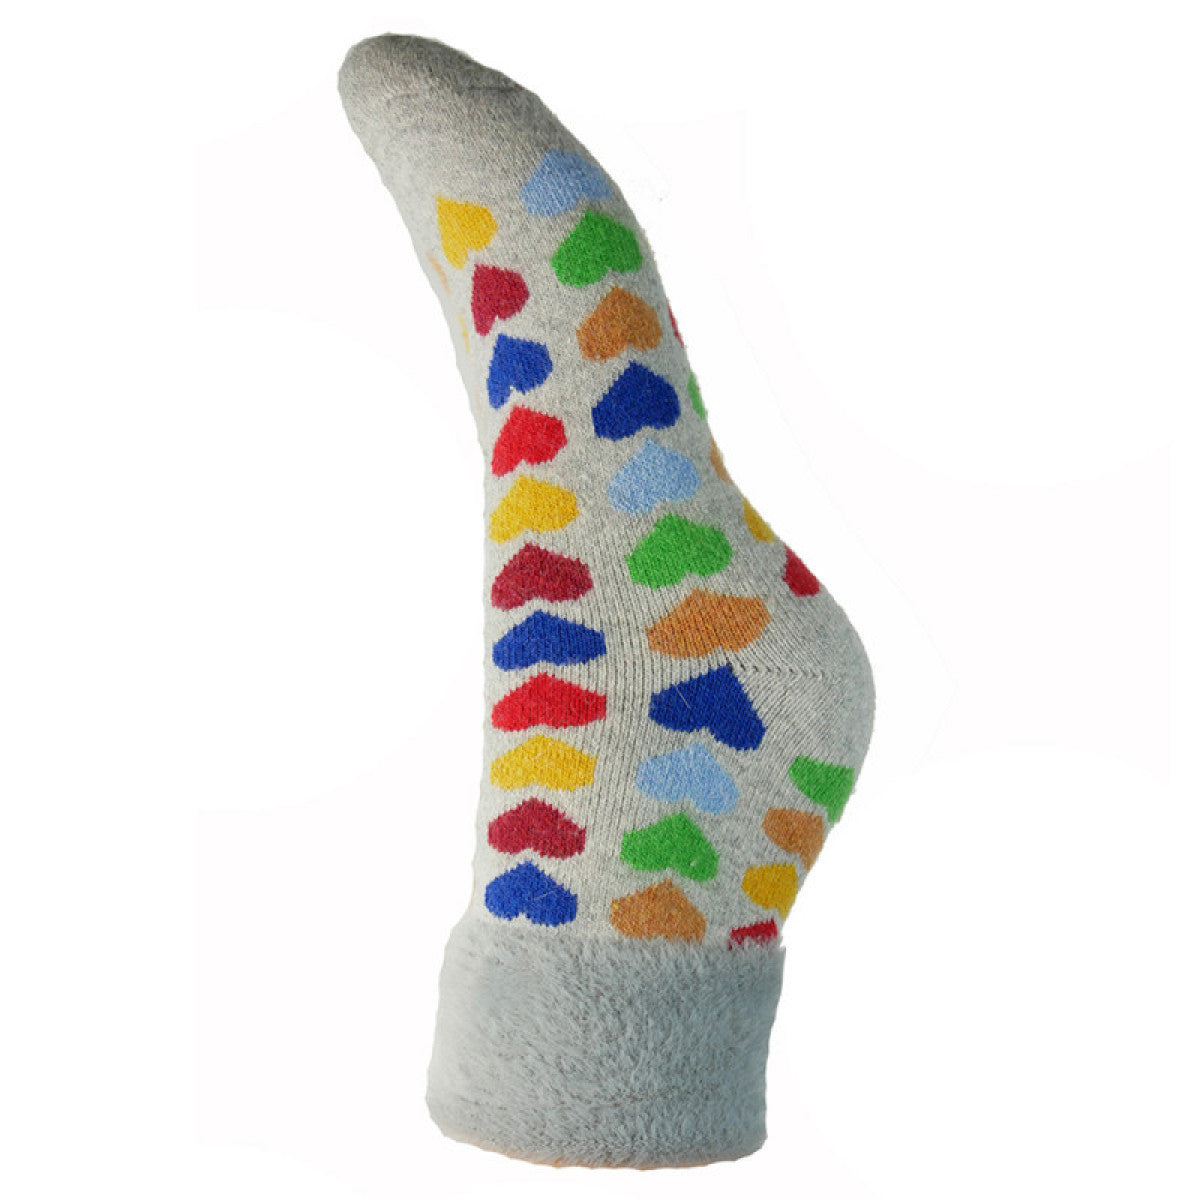 Wool Blend Socks – Grey with Multi-Coloured Hearts and Faux Fur Cuff